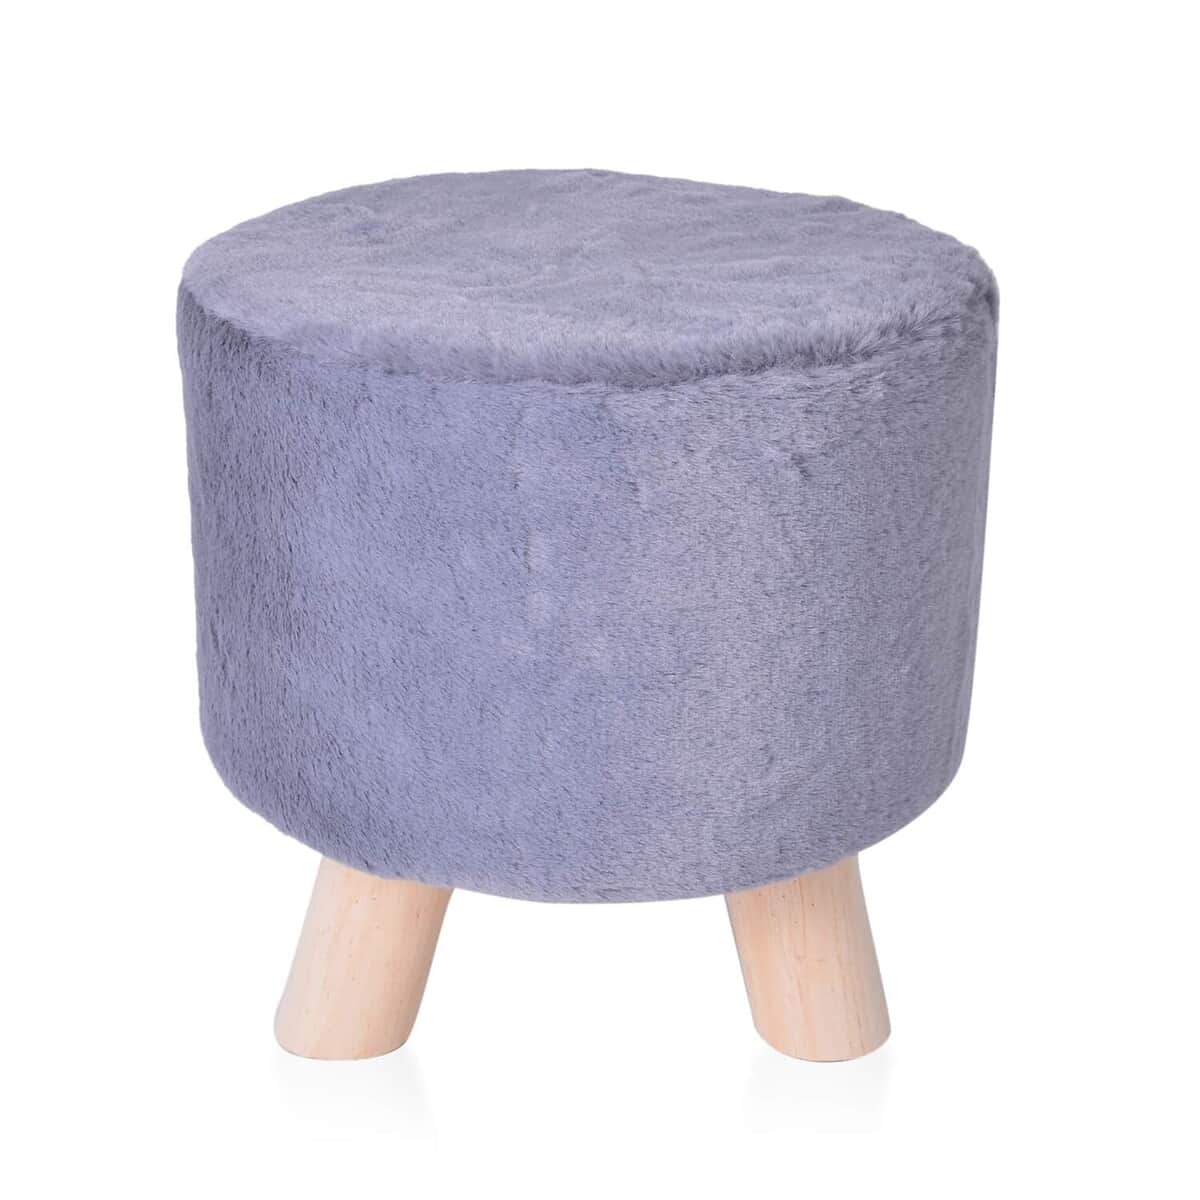 Faux Fur Gray Round Foot Stool Ottoman- 3 Wooden Legs- Best Stool for Living Room/Bedroom/Dressing Room/Drawing Room- Soft Plush Fabric image number 3